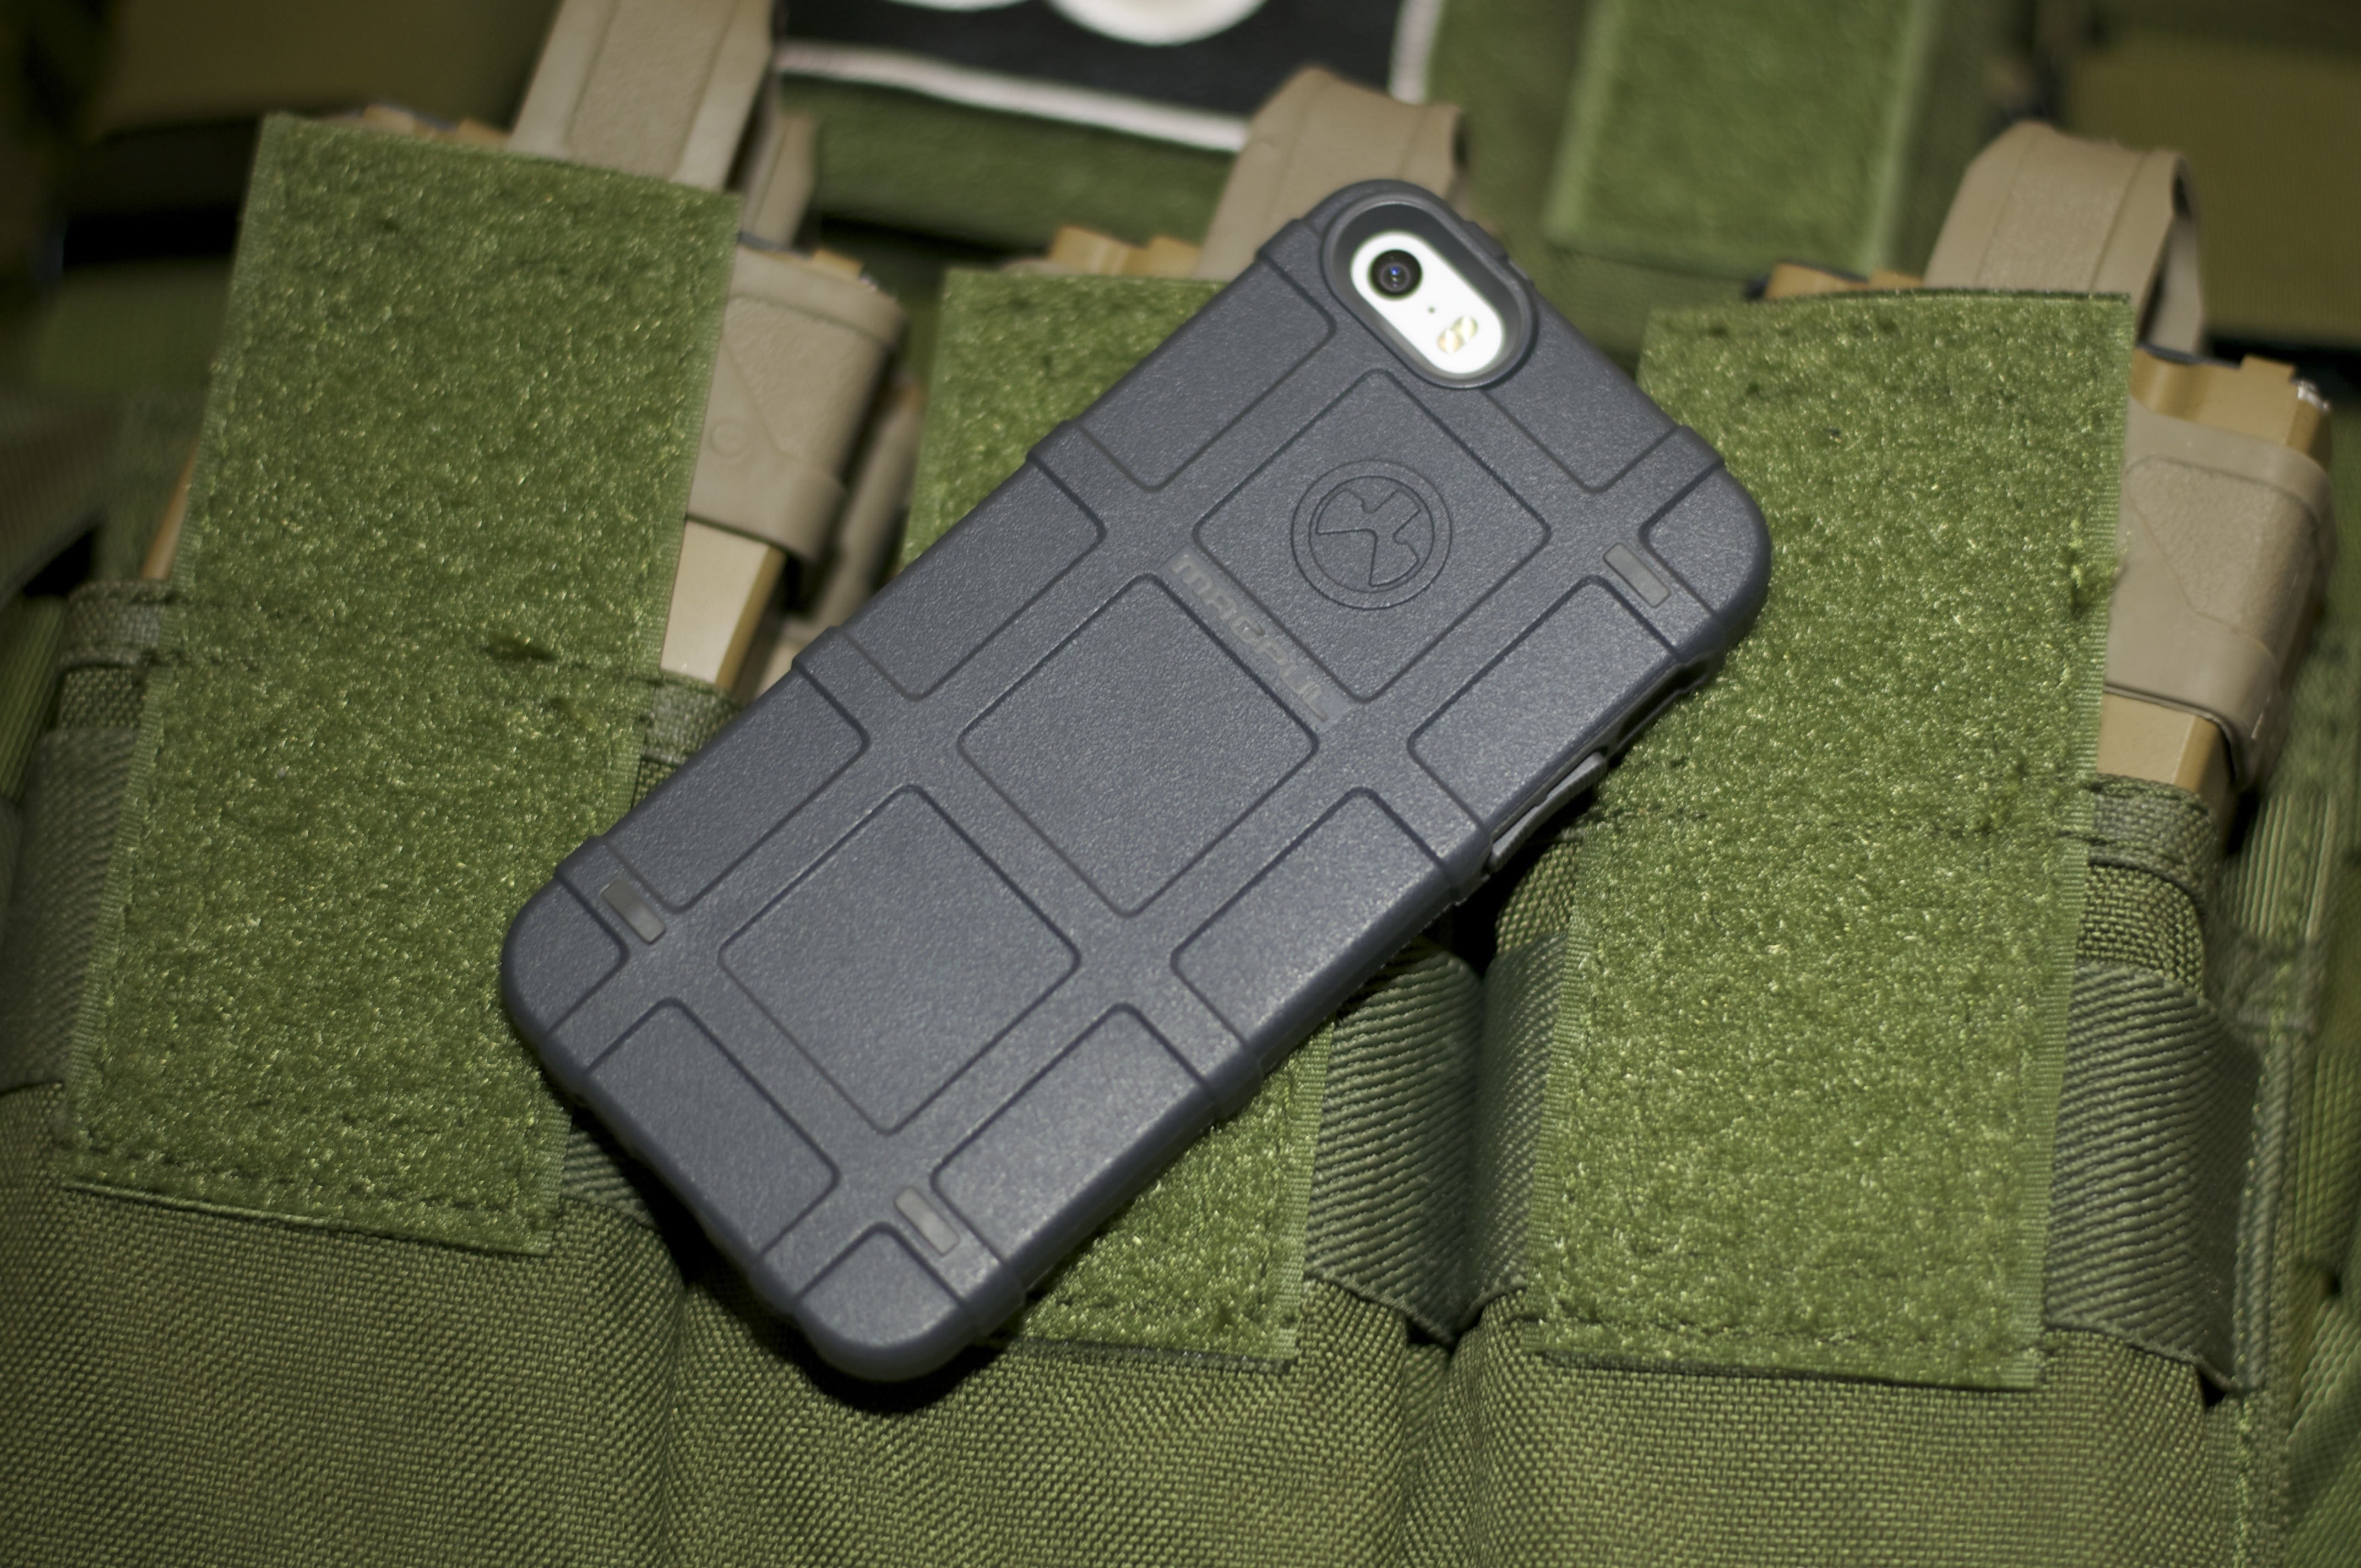 Magpul Bump Case for the new iPhone 5/5s back